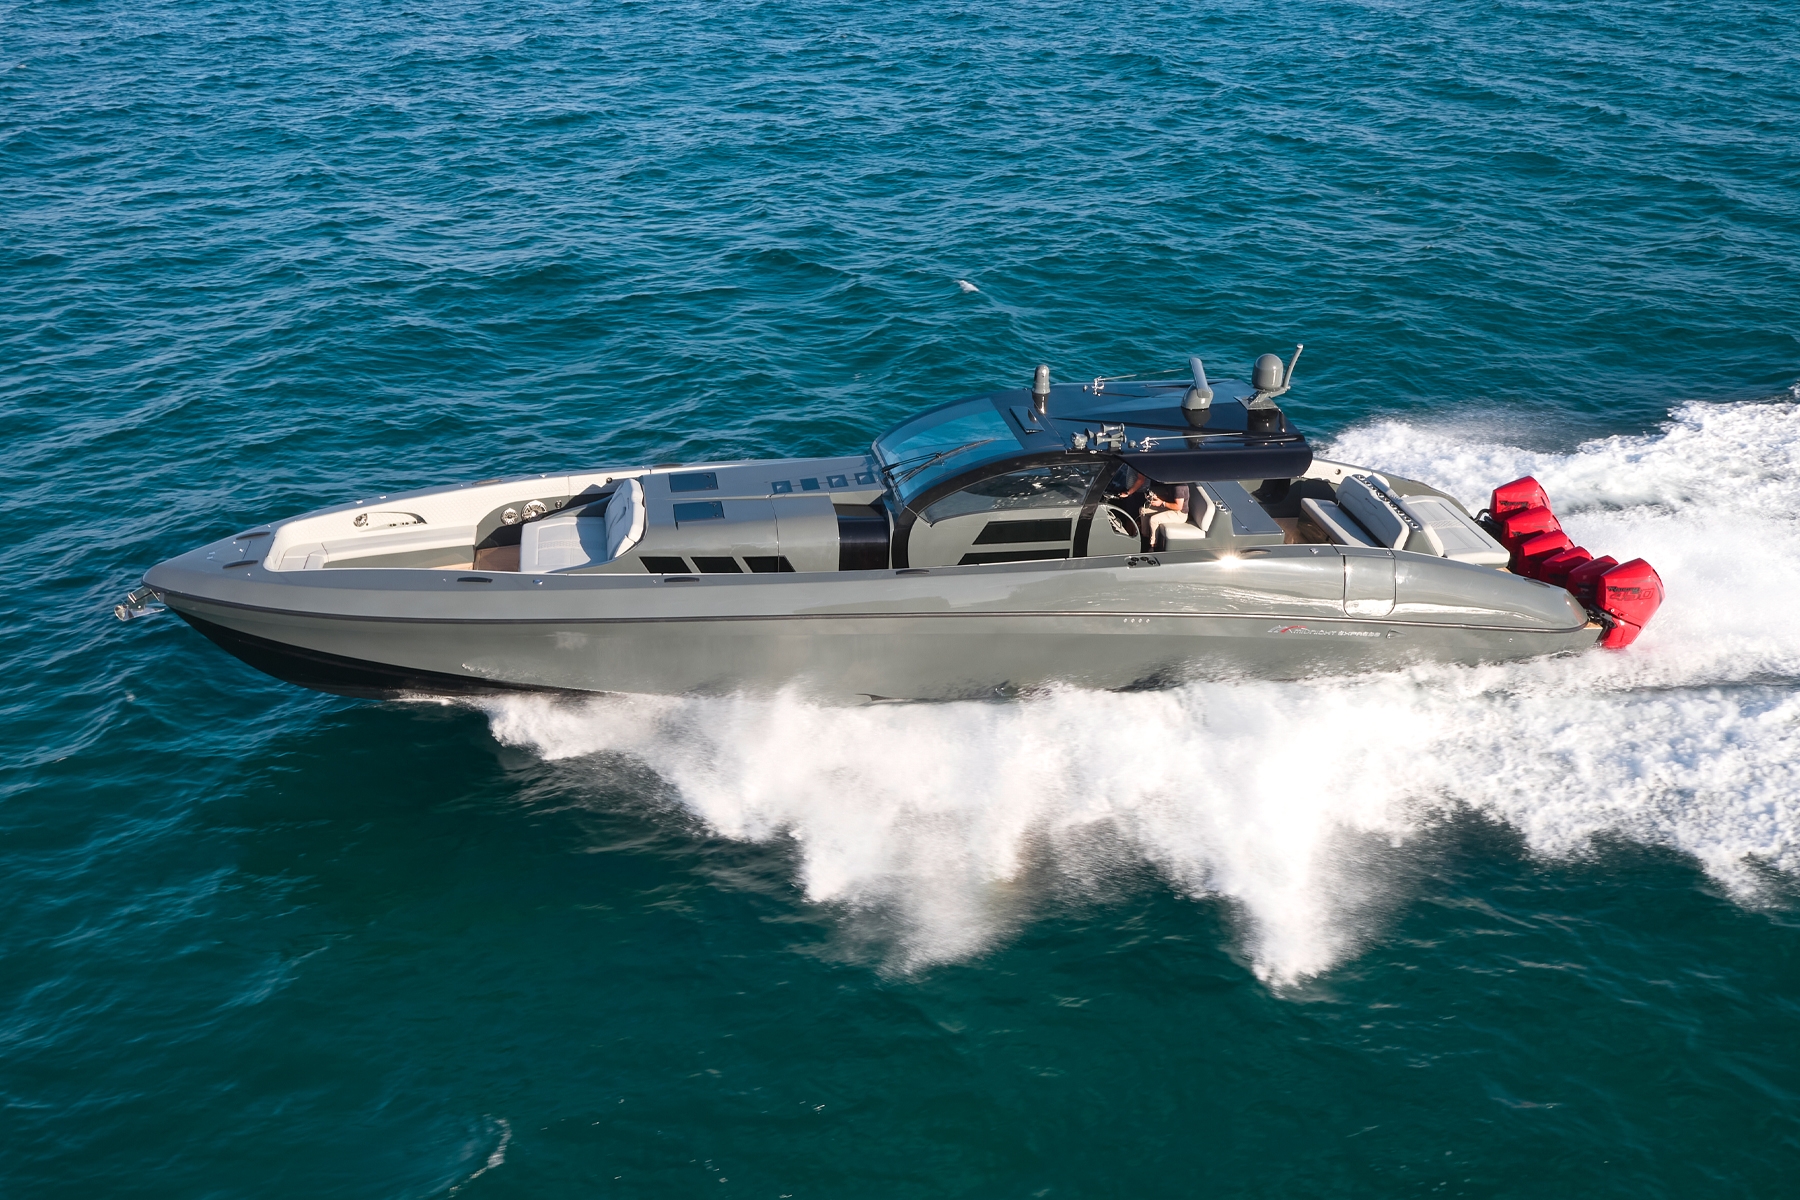 Center Console Boats & Luxury Center Console Yachts For Sale